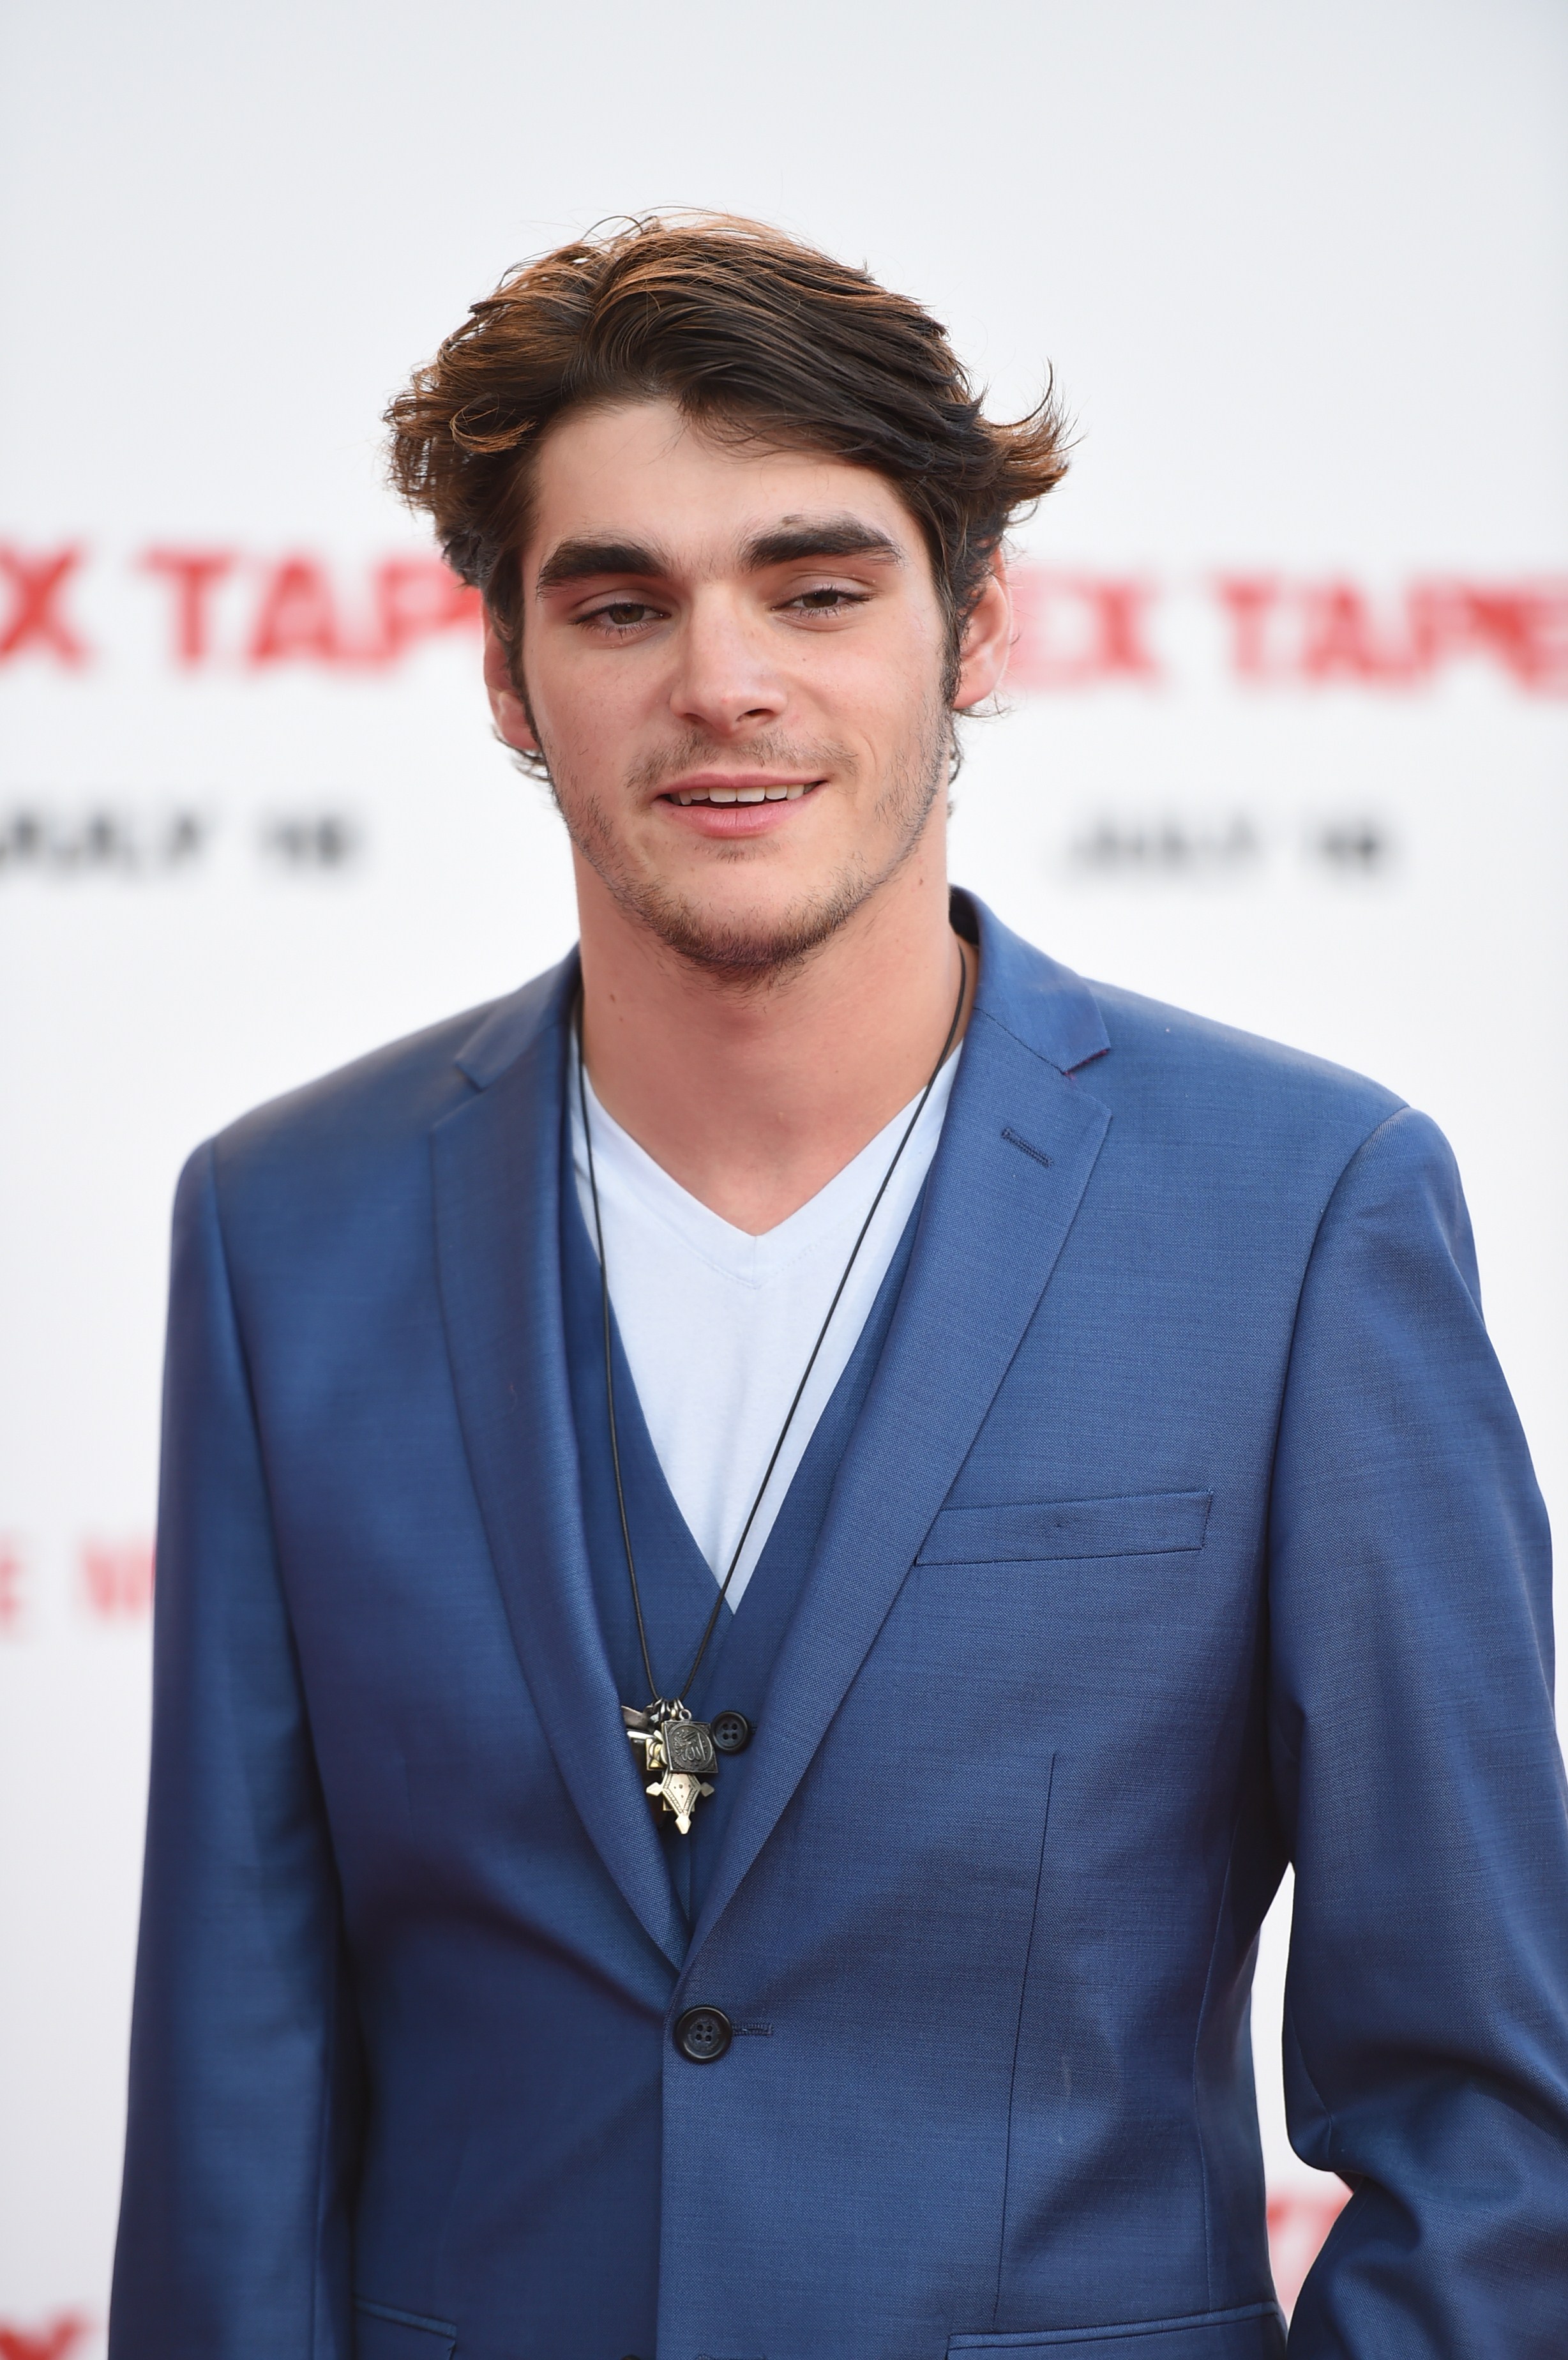 All Hands On the Bad One: RJ Mitte | Handsome male models 